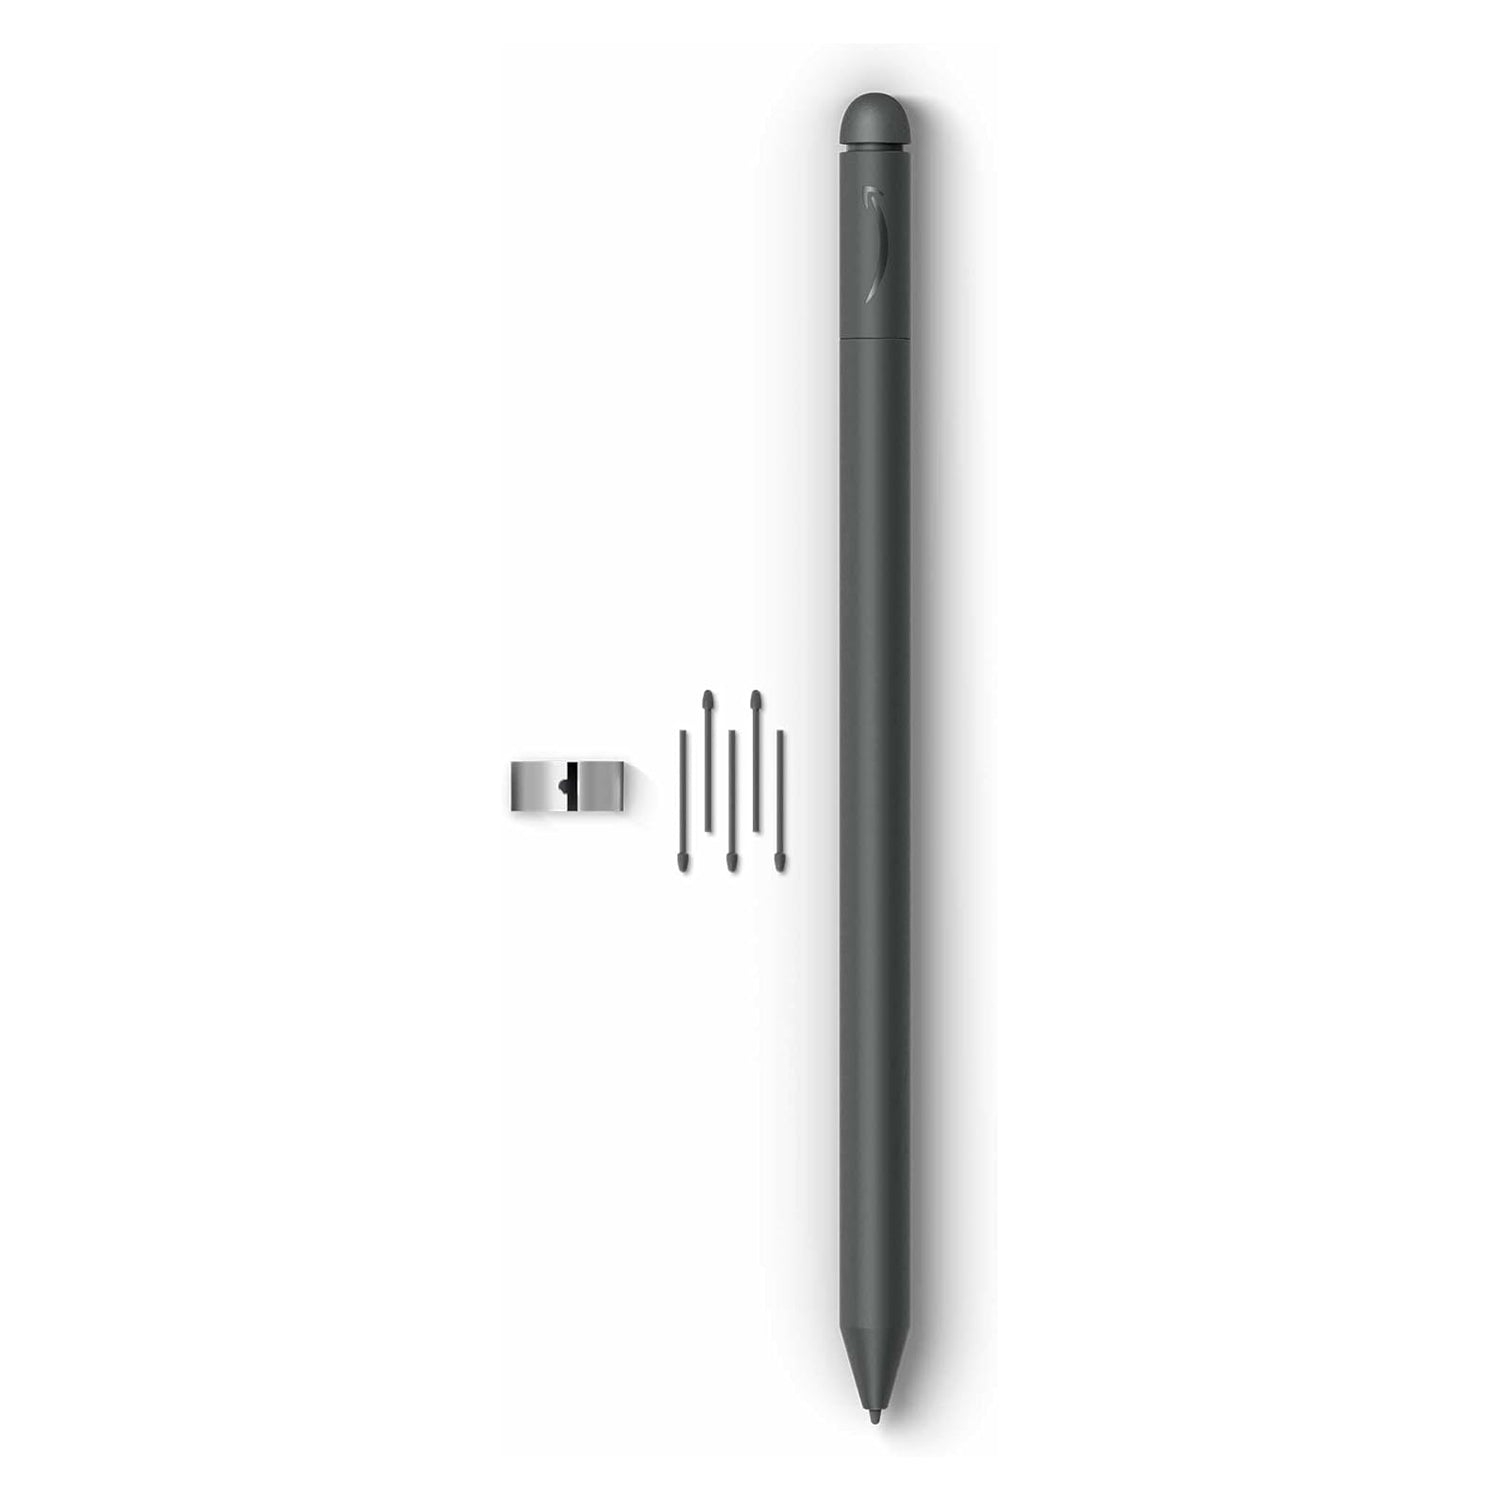 Kindle Scribe E-Reader + Digital Notebook with 10.2" 300 PPI Paperwhite Display & Premium Pen